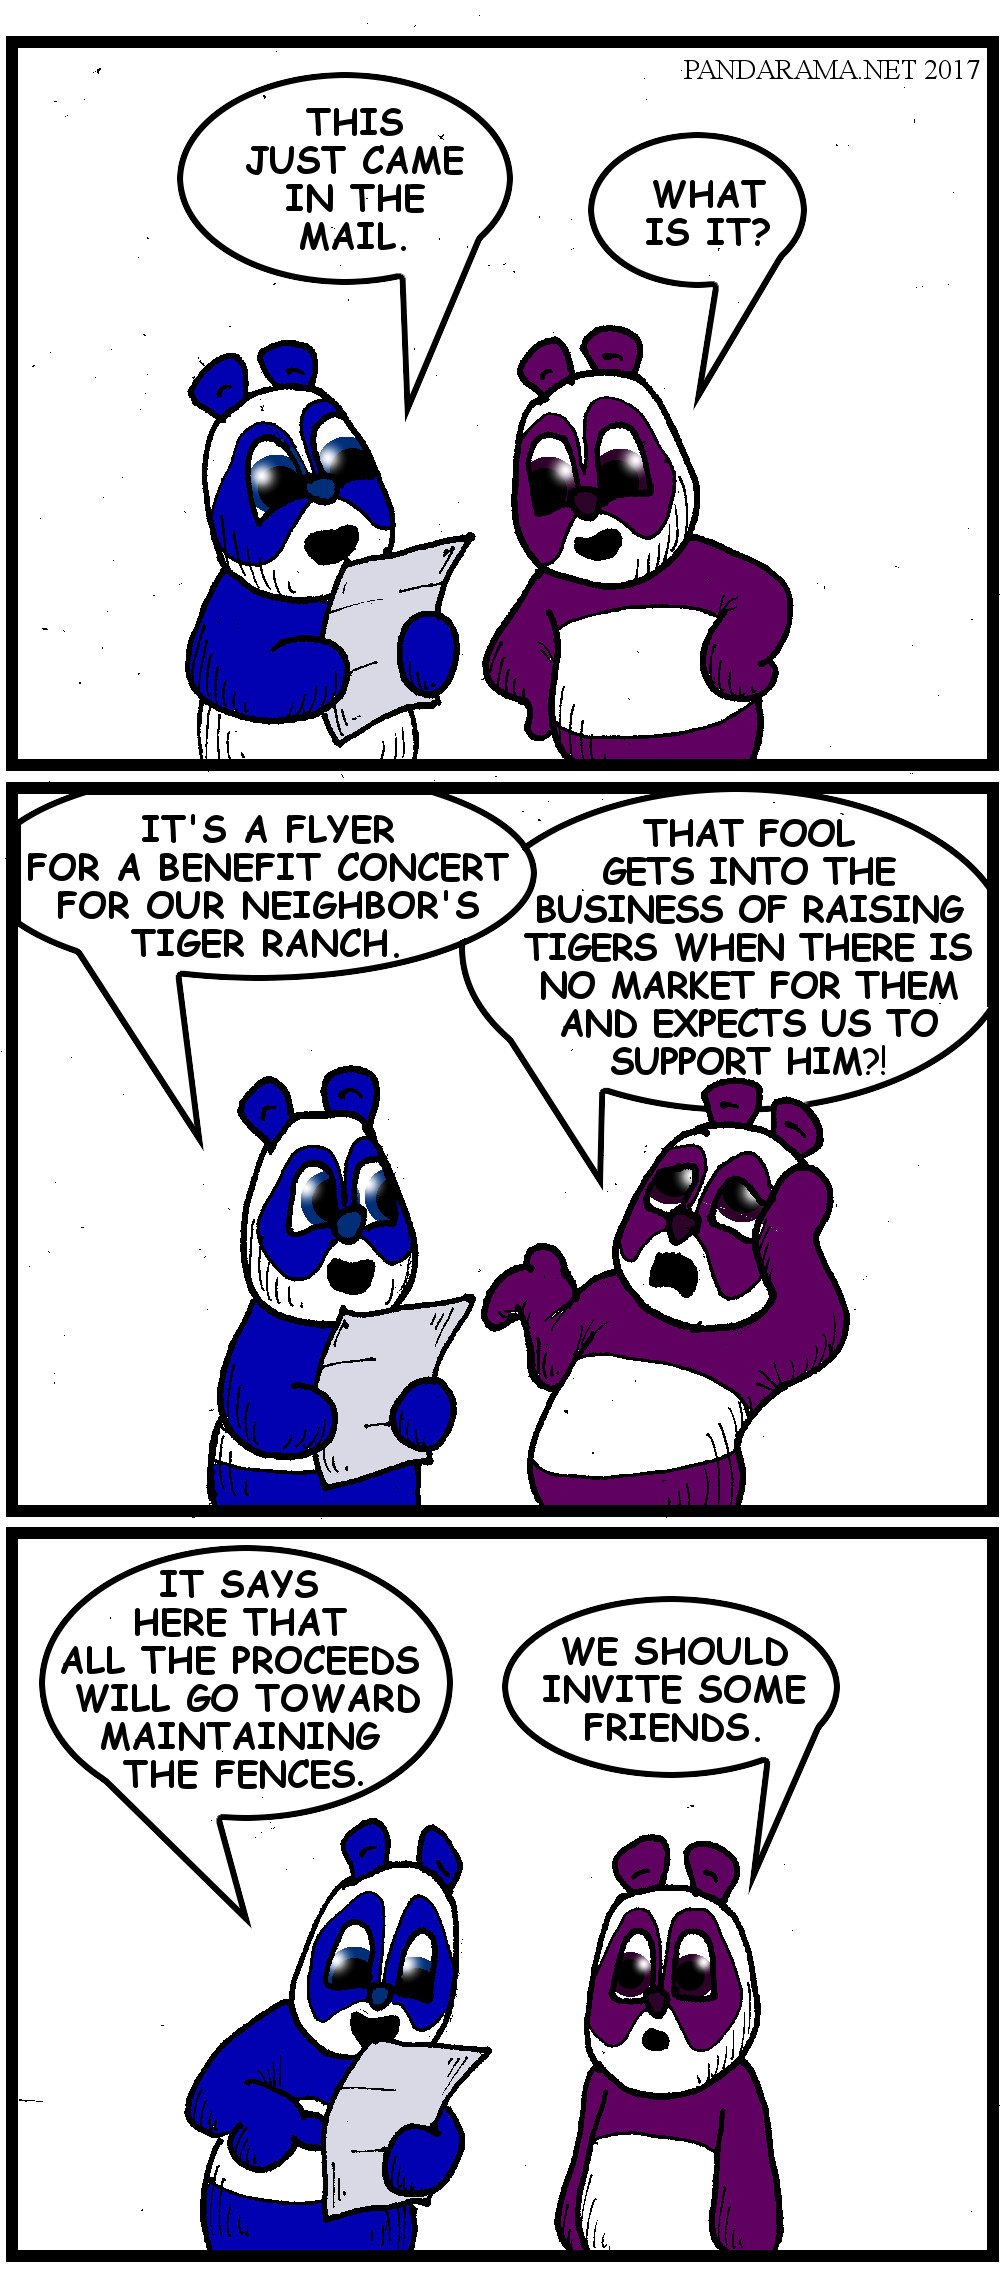 cartoon where pandas support a benefit concert that supports the maintenance of fences at their neighbor's tiger farm.